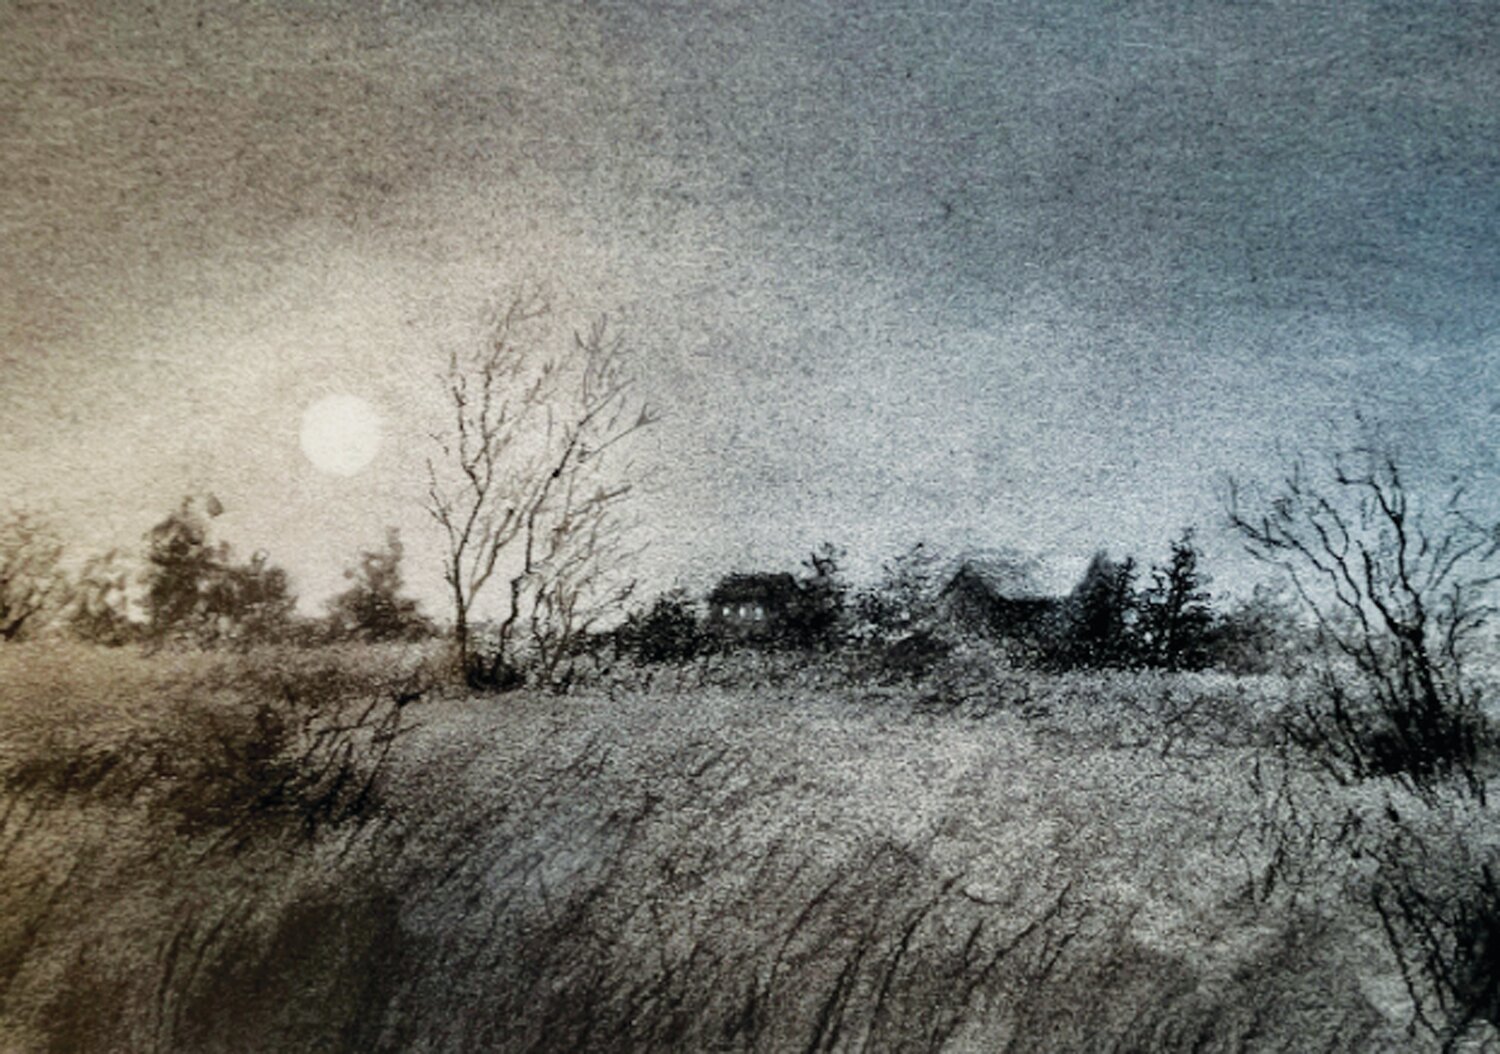 Jane Ramsey’s “Wolf Moon,” a charcoal on paper, received the first place vote for the “R.E.D. Show” Artists' Choice Award and was a runner-up in the People’s Choice polling.